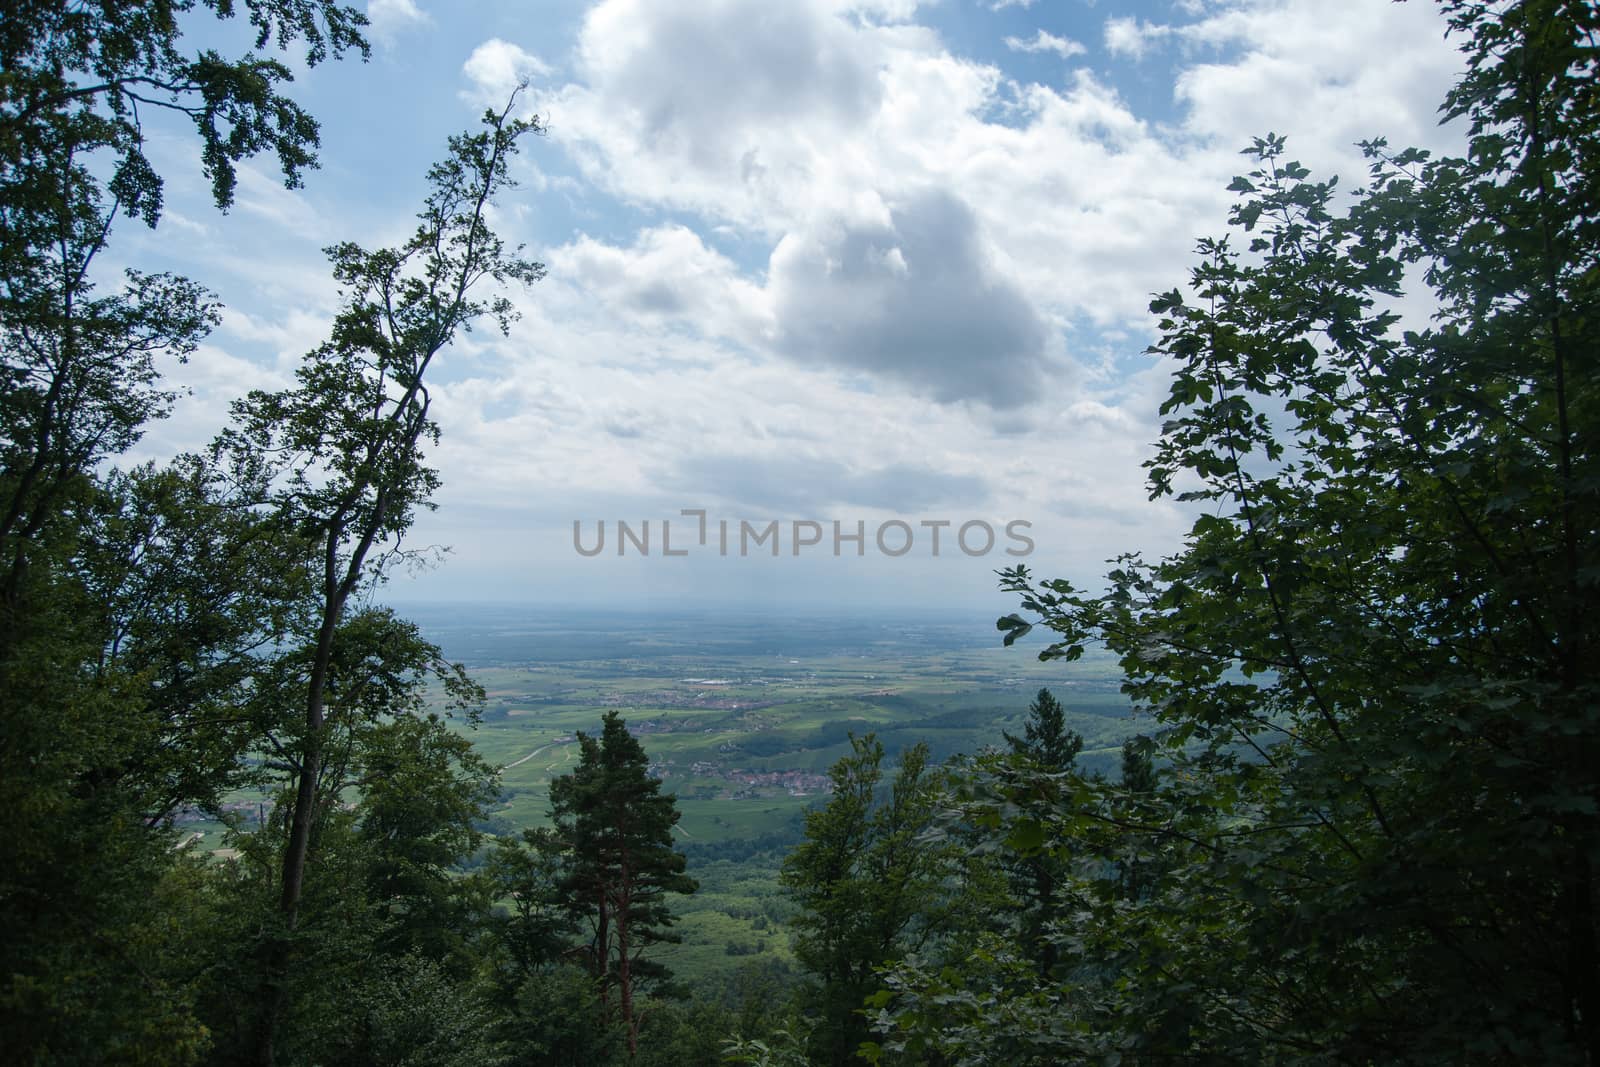 Alsace landscape from a mountain by javax